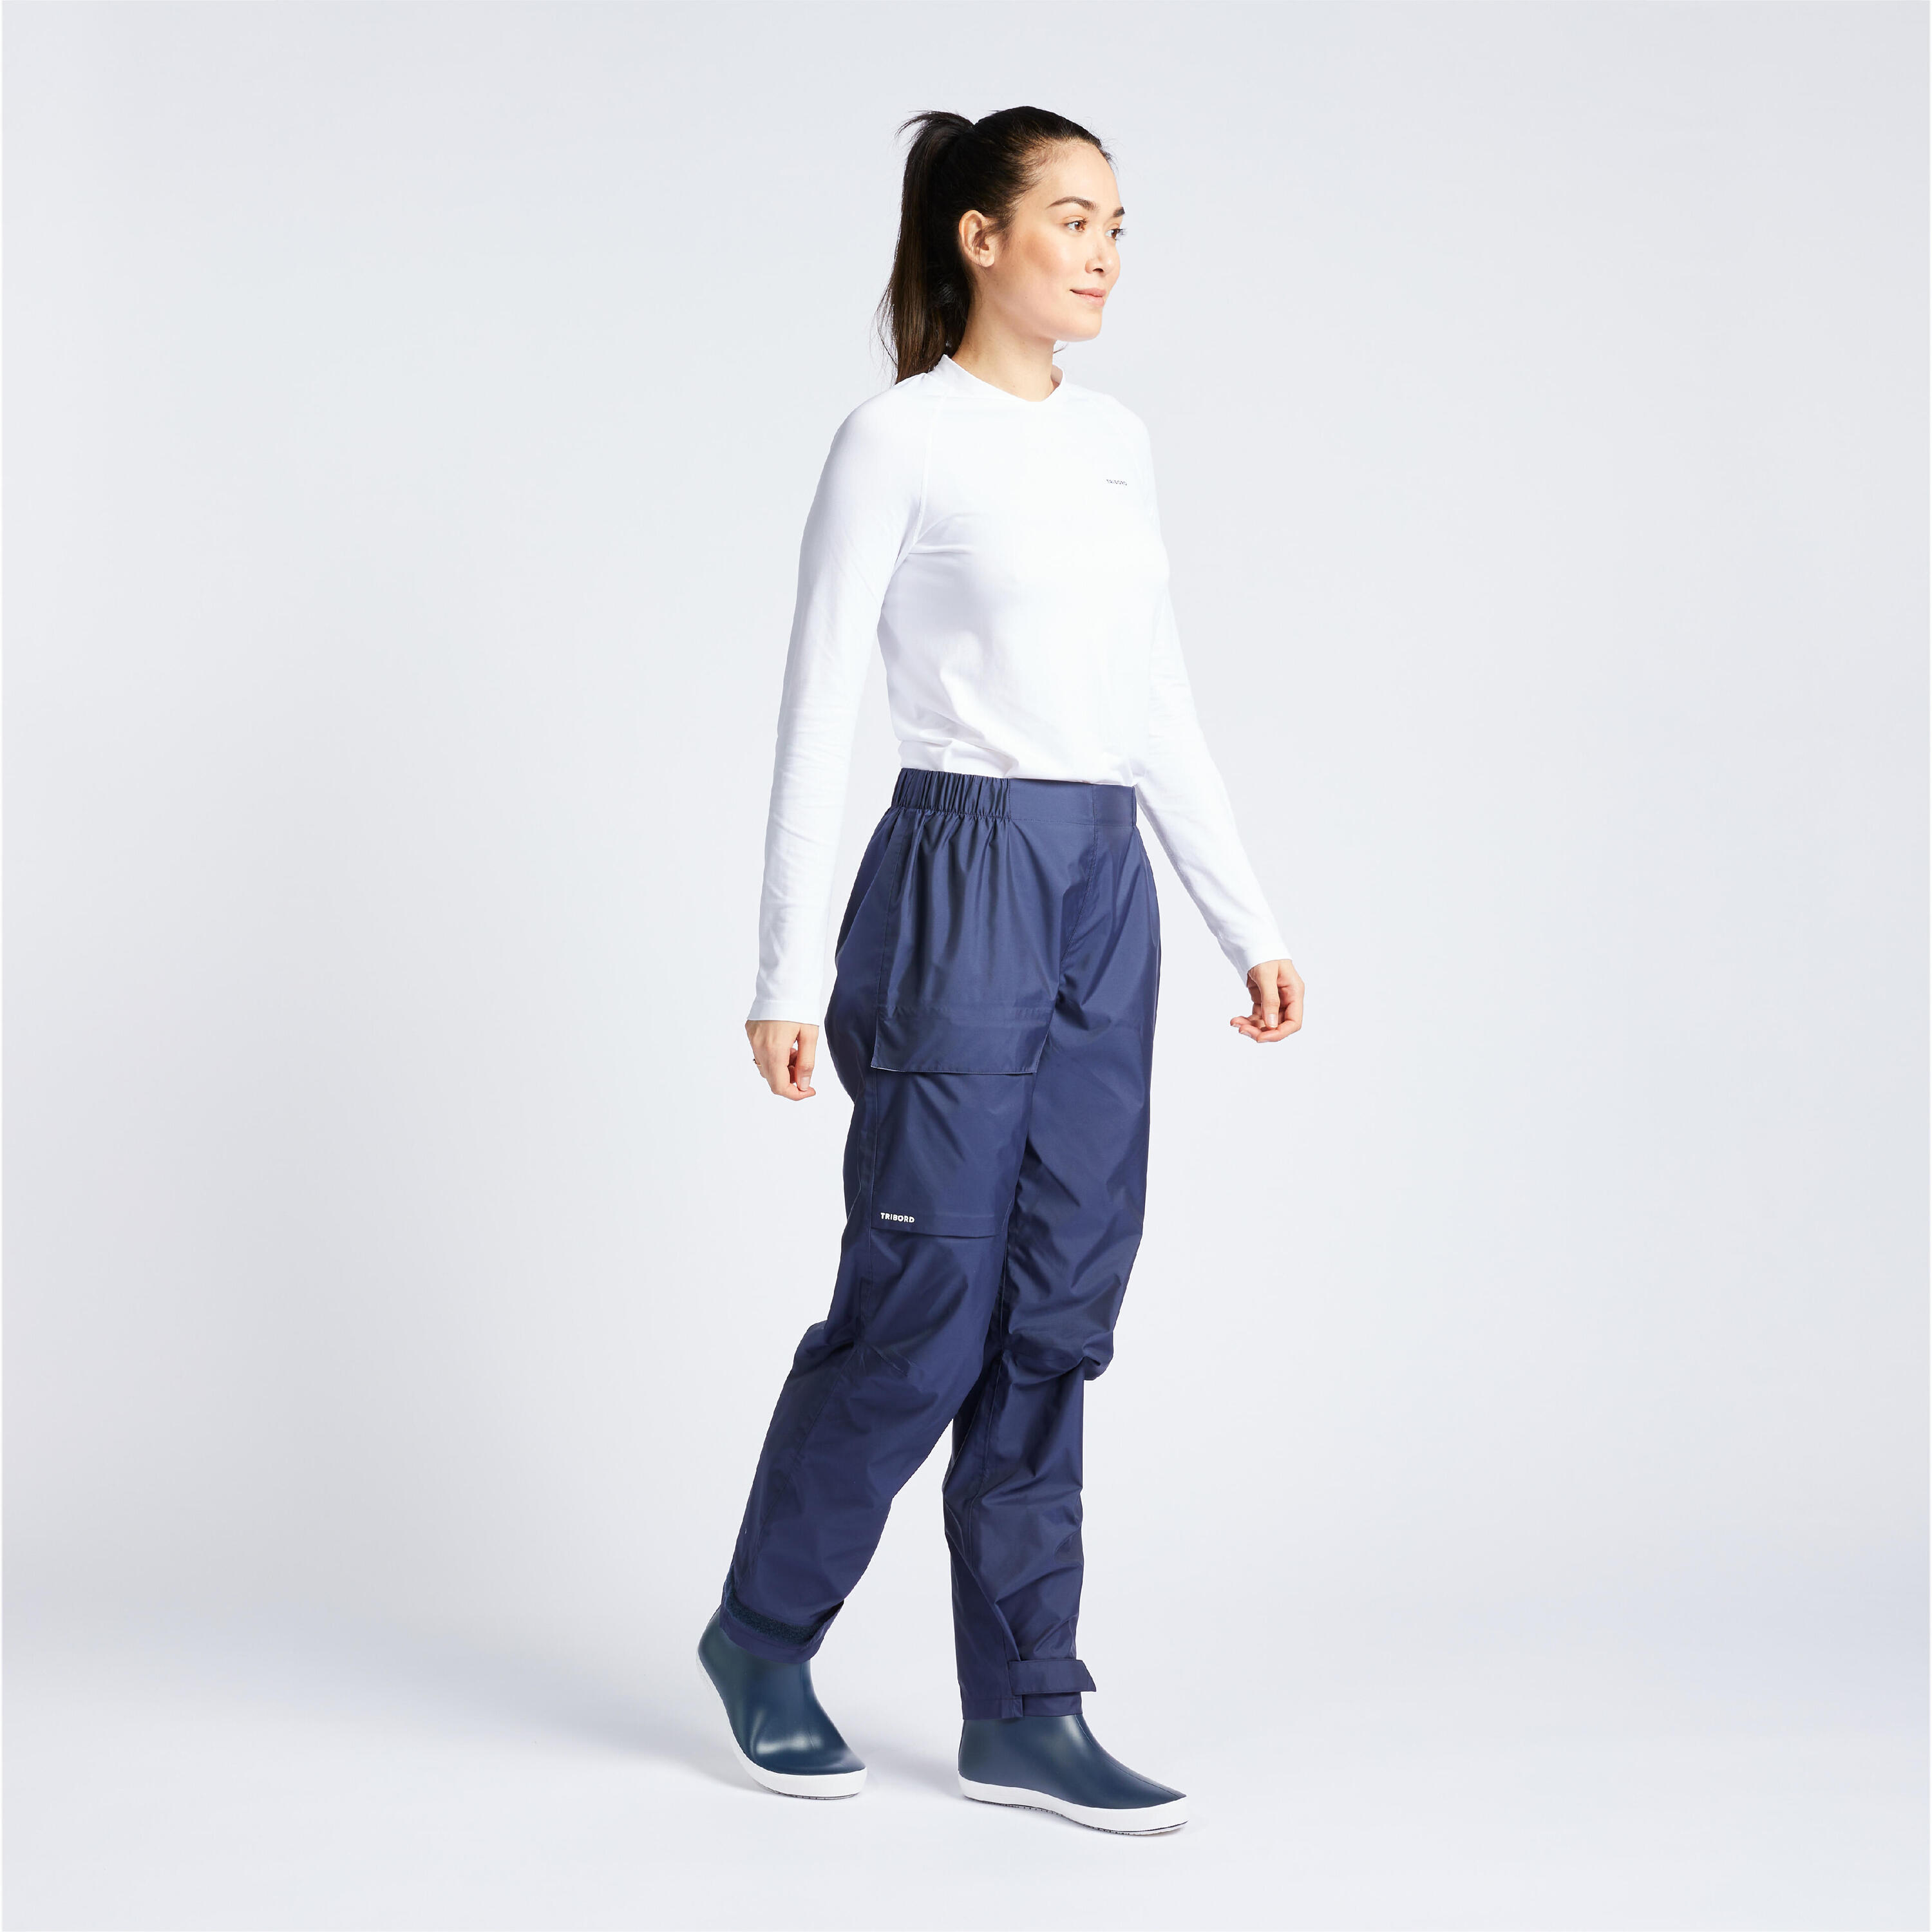 Women's waterproof sailing overtrousers 100 - Navy 8/8